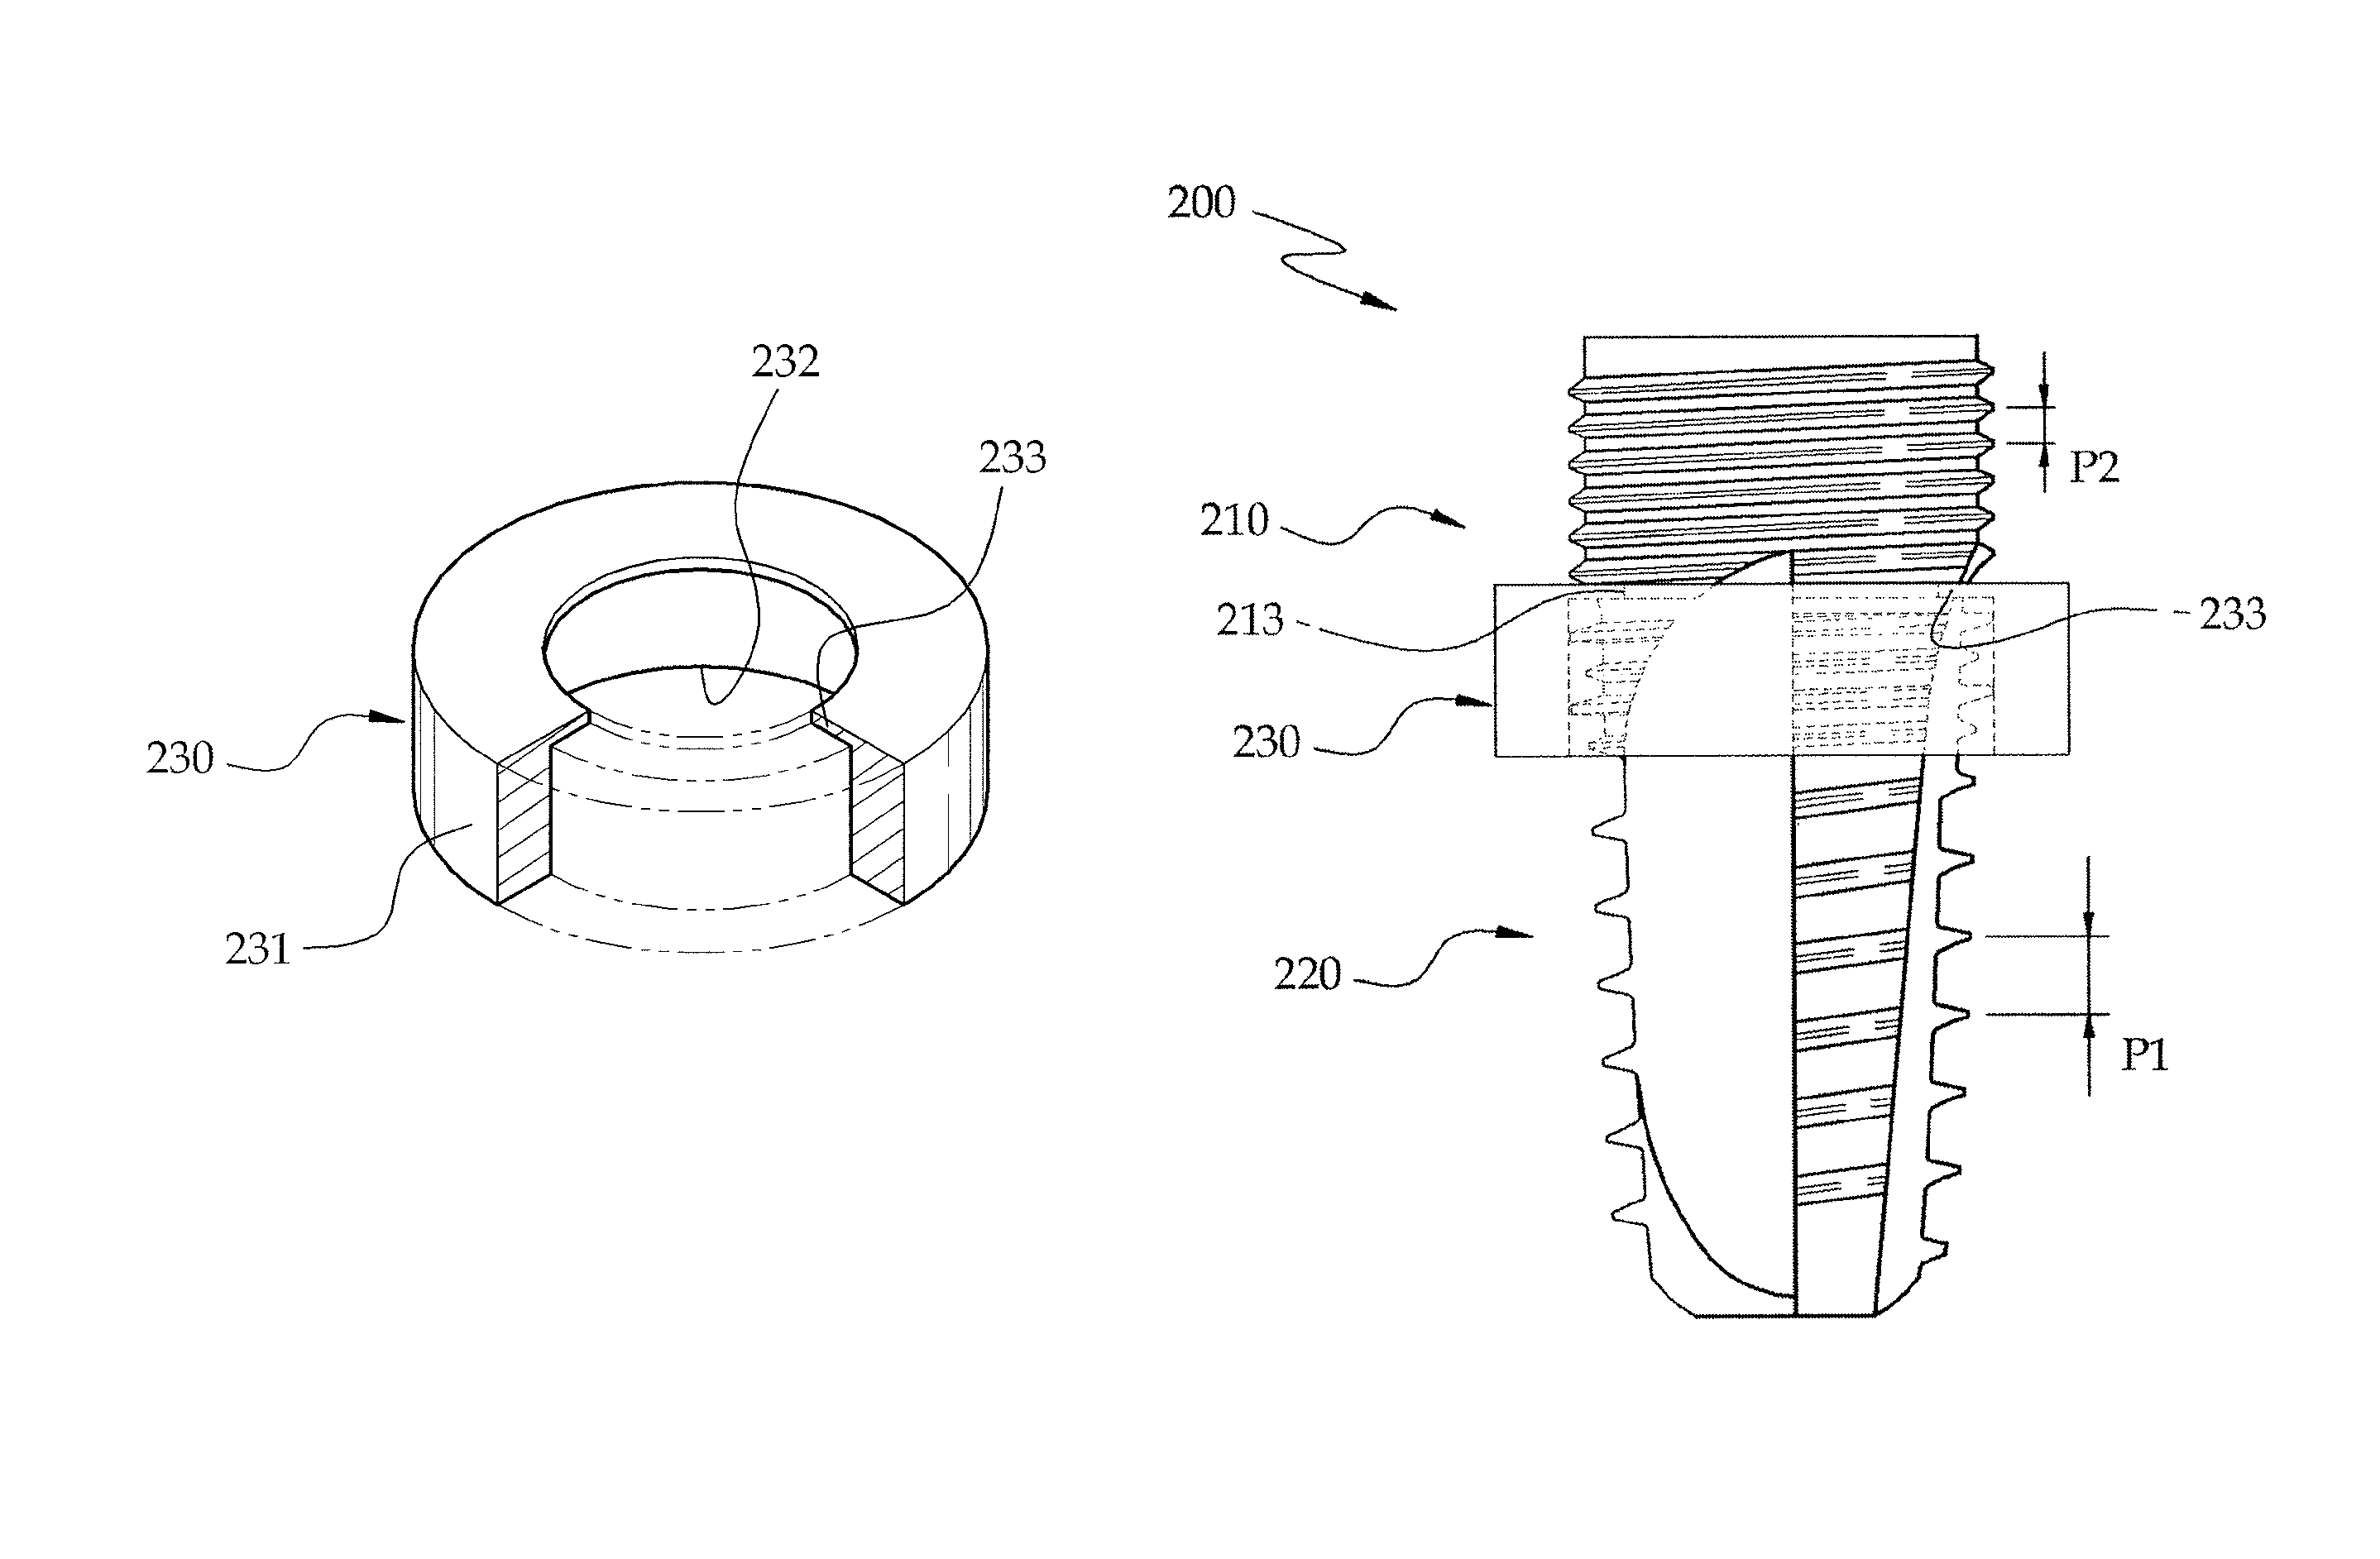 Method of manufacturing a fixture of a dental implant